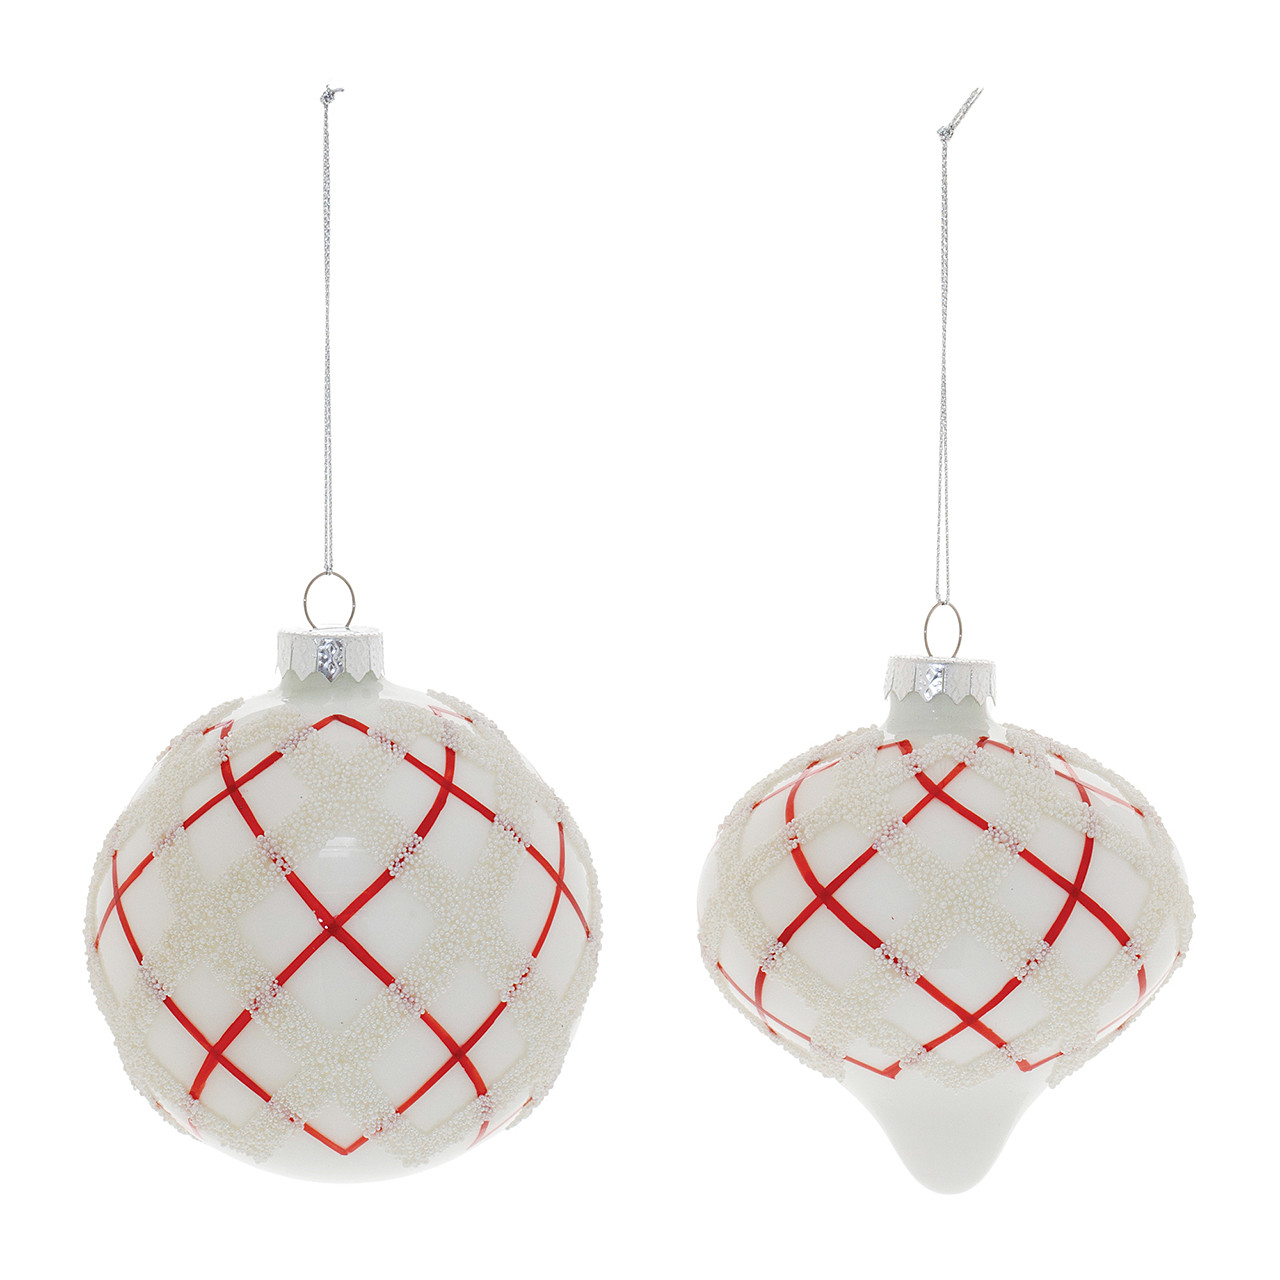 In-Store Only - Glass Red and White Criss Cross Ball Onion Ornaments, Set of 2 